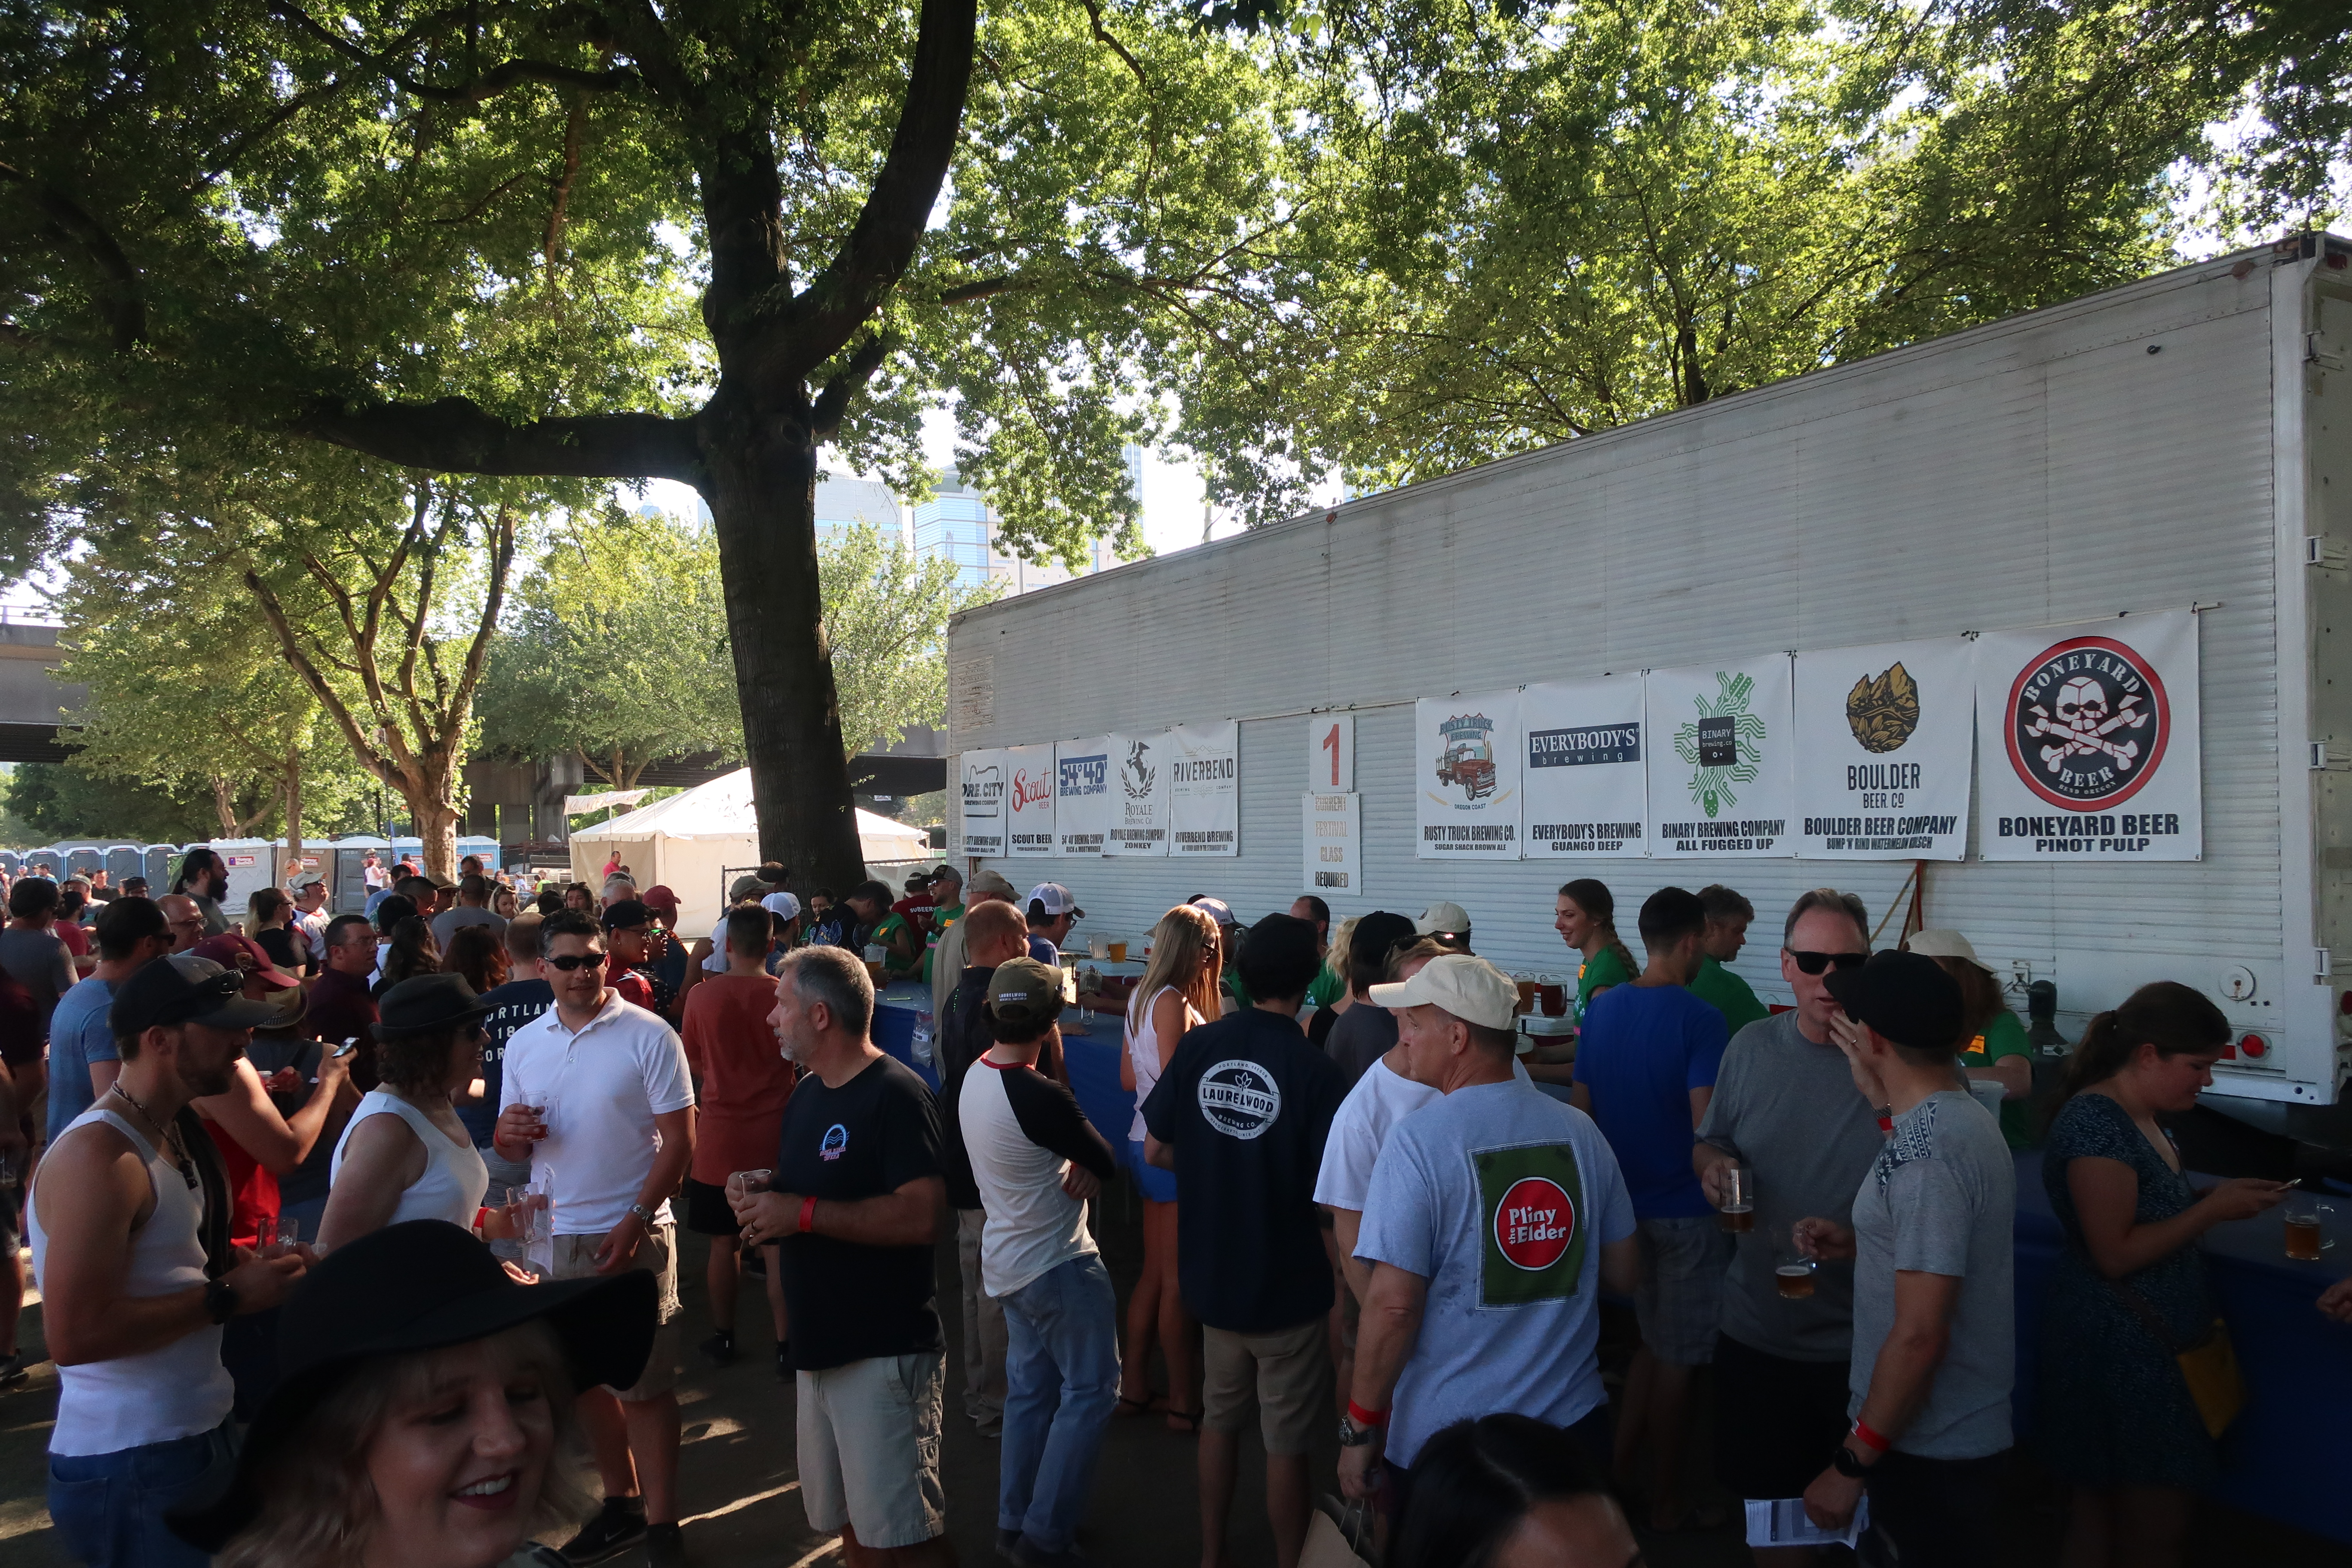 The South Trailer area at the 2018 Oregon Brewers Festival provides a lot of shade later in the day.